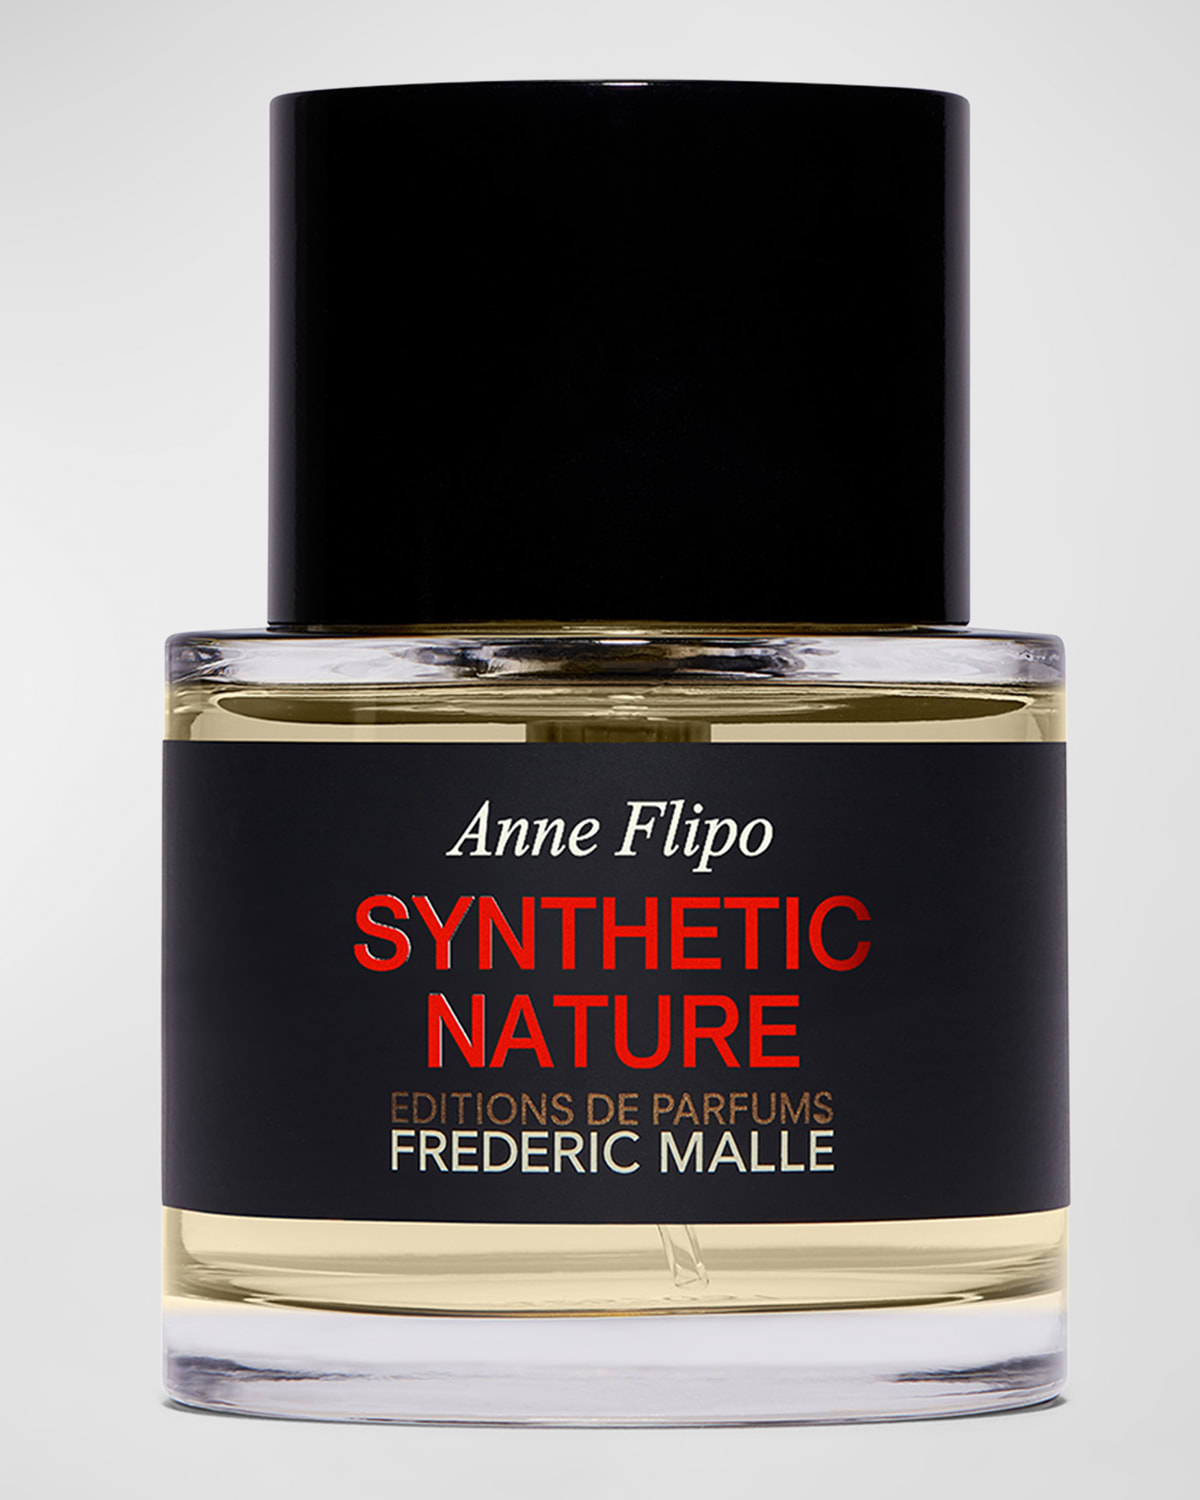 Shop Editions De Parfums Frederic Malle Synthetic Nature Perfume, 1.7 Oz.